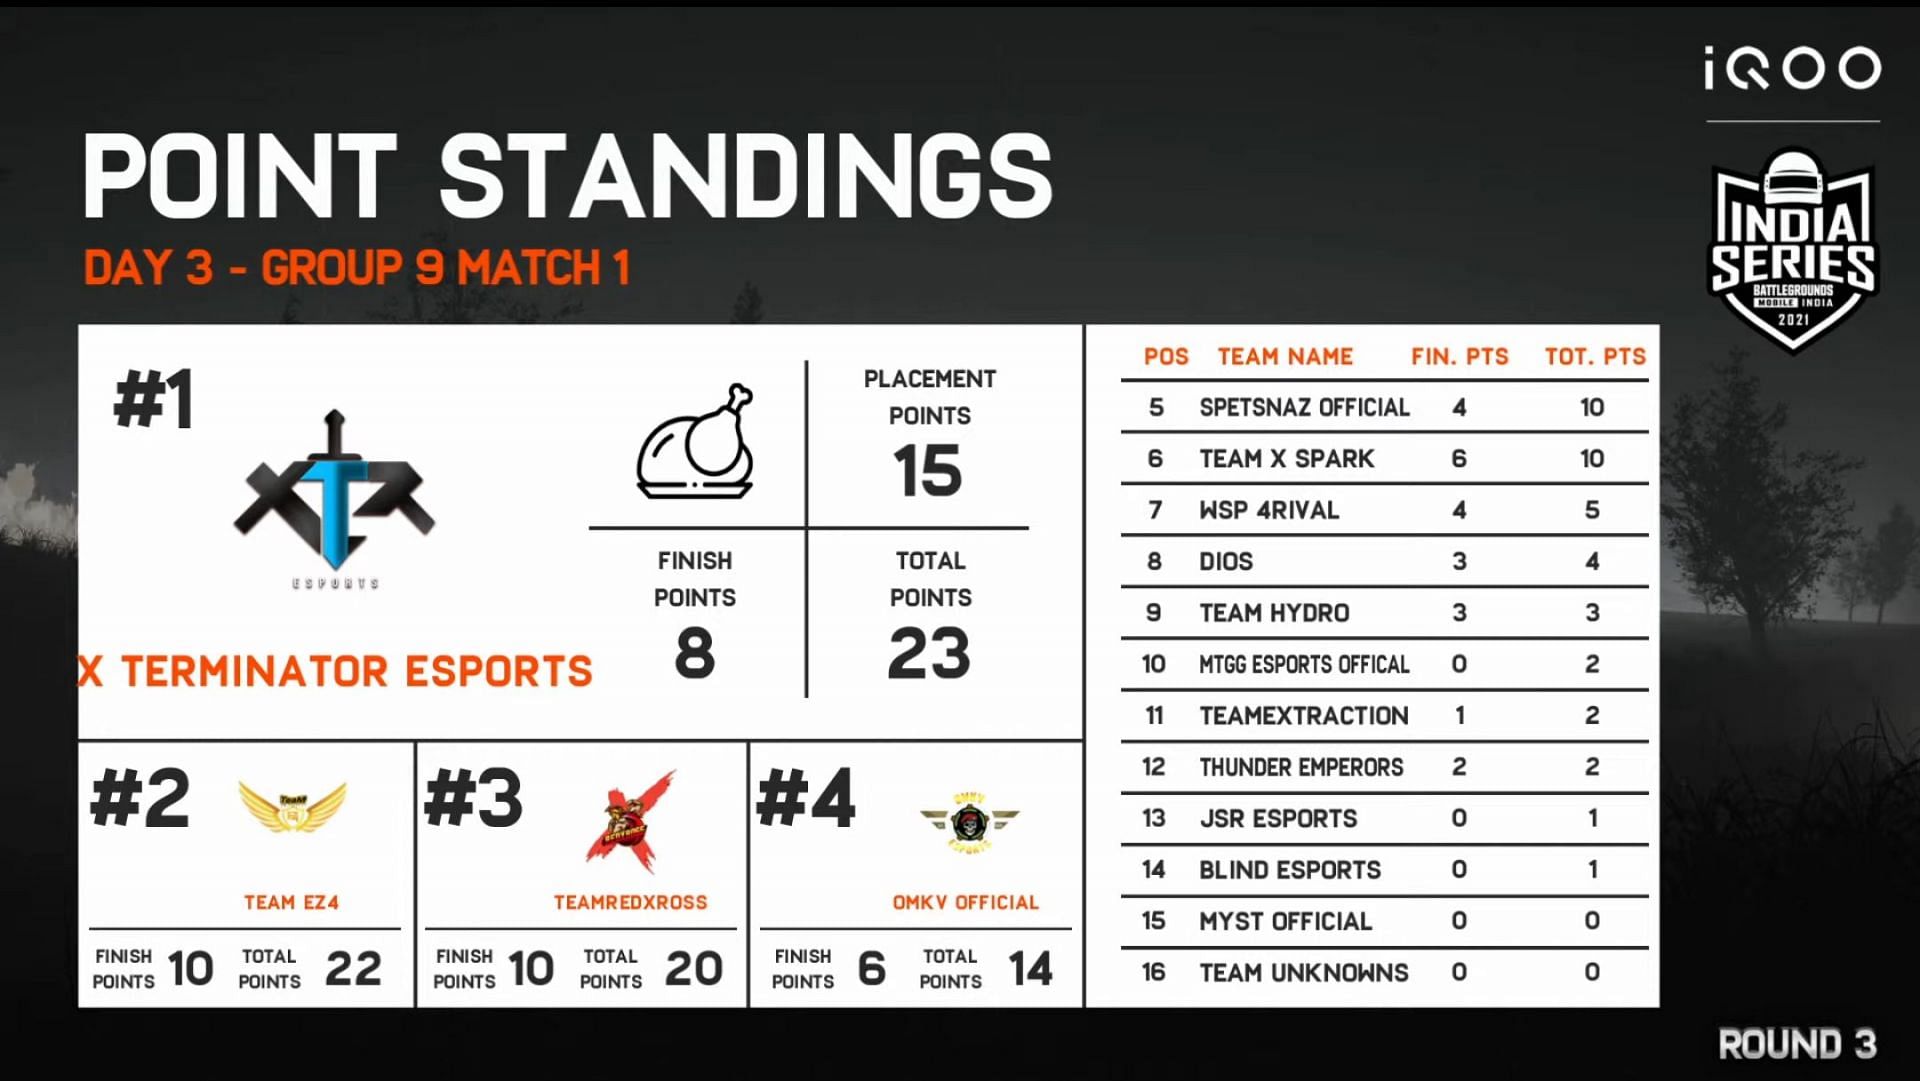 Team Xspark finished 6th place in the first match (Image via BGMI)